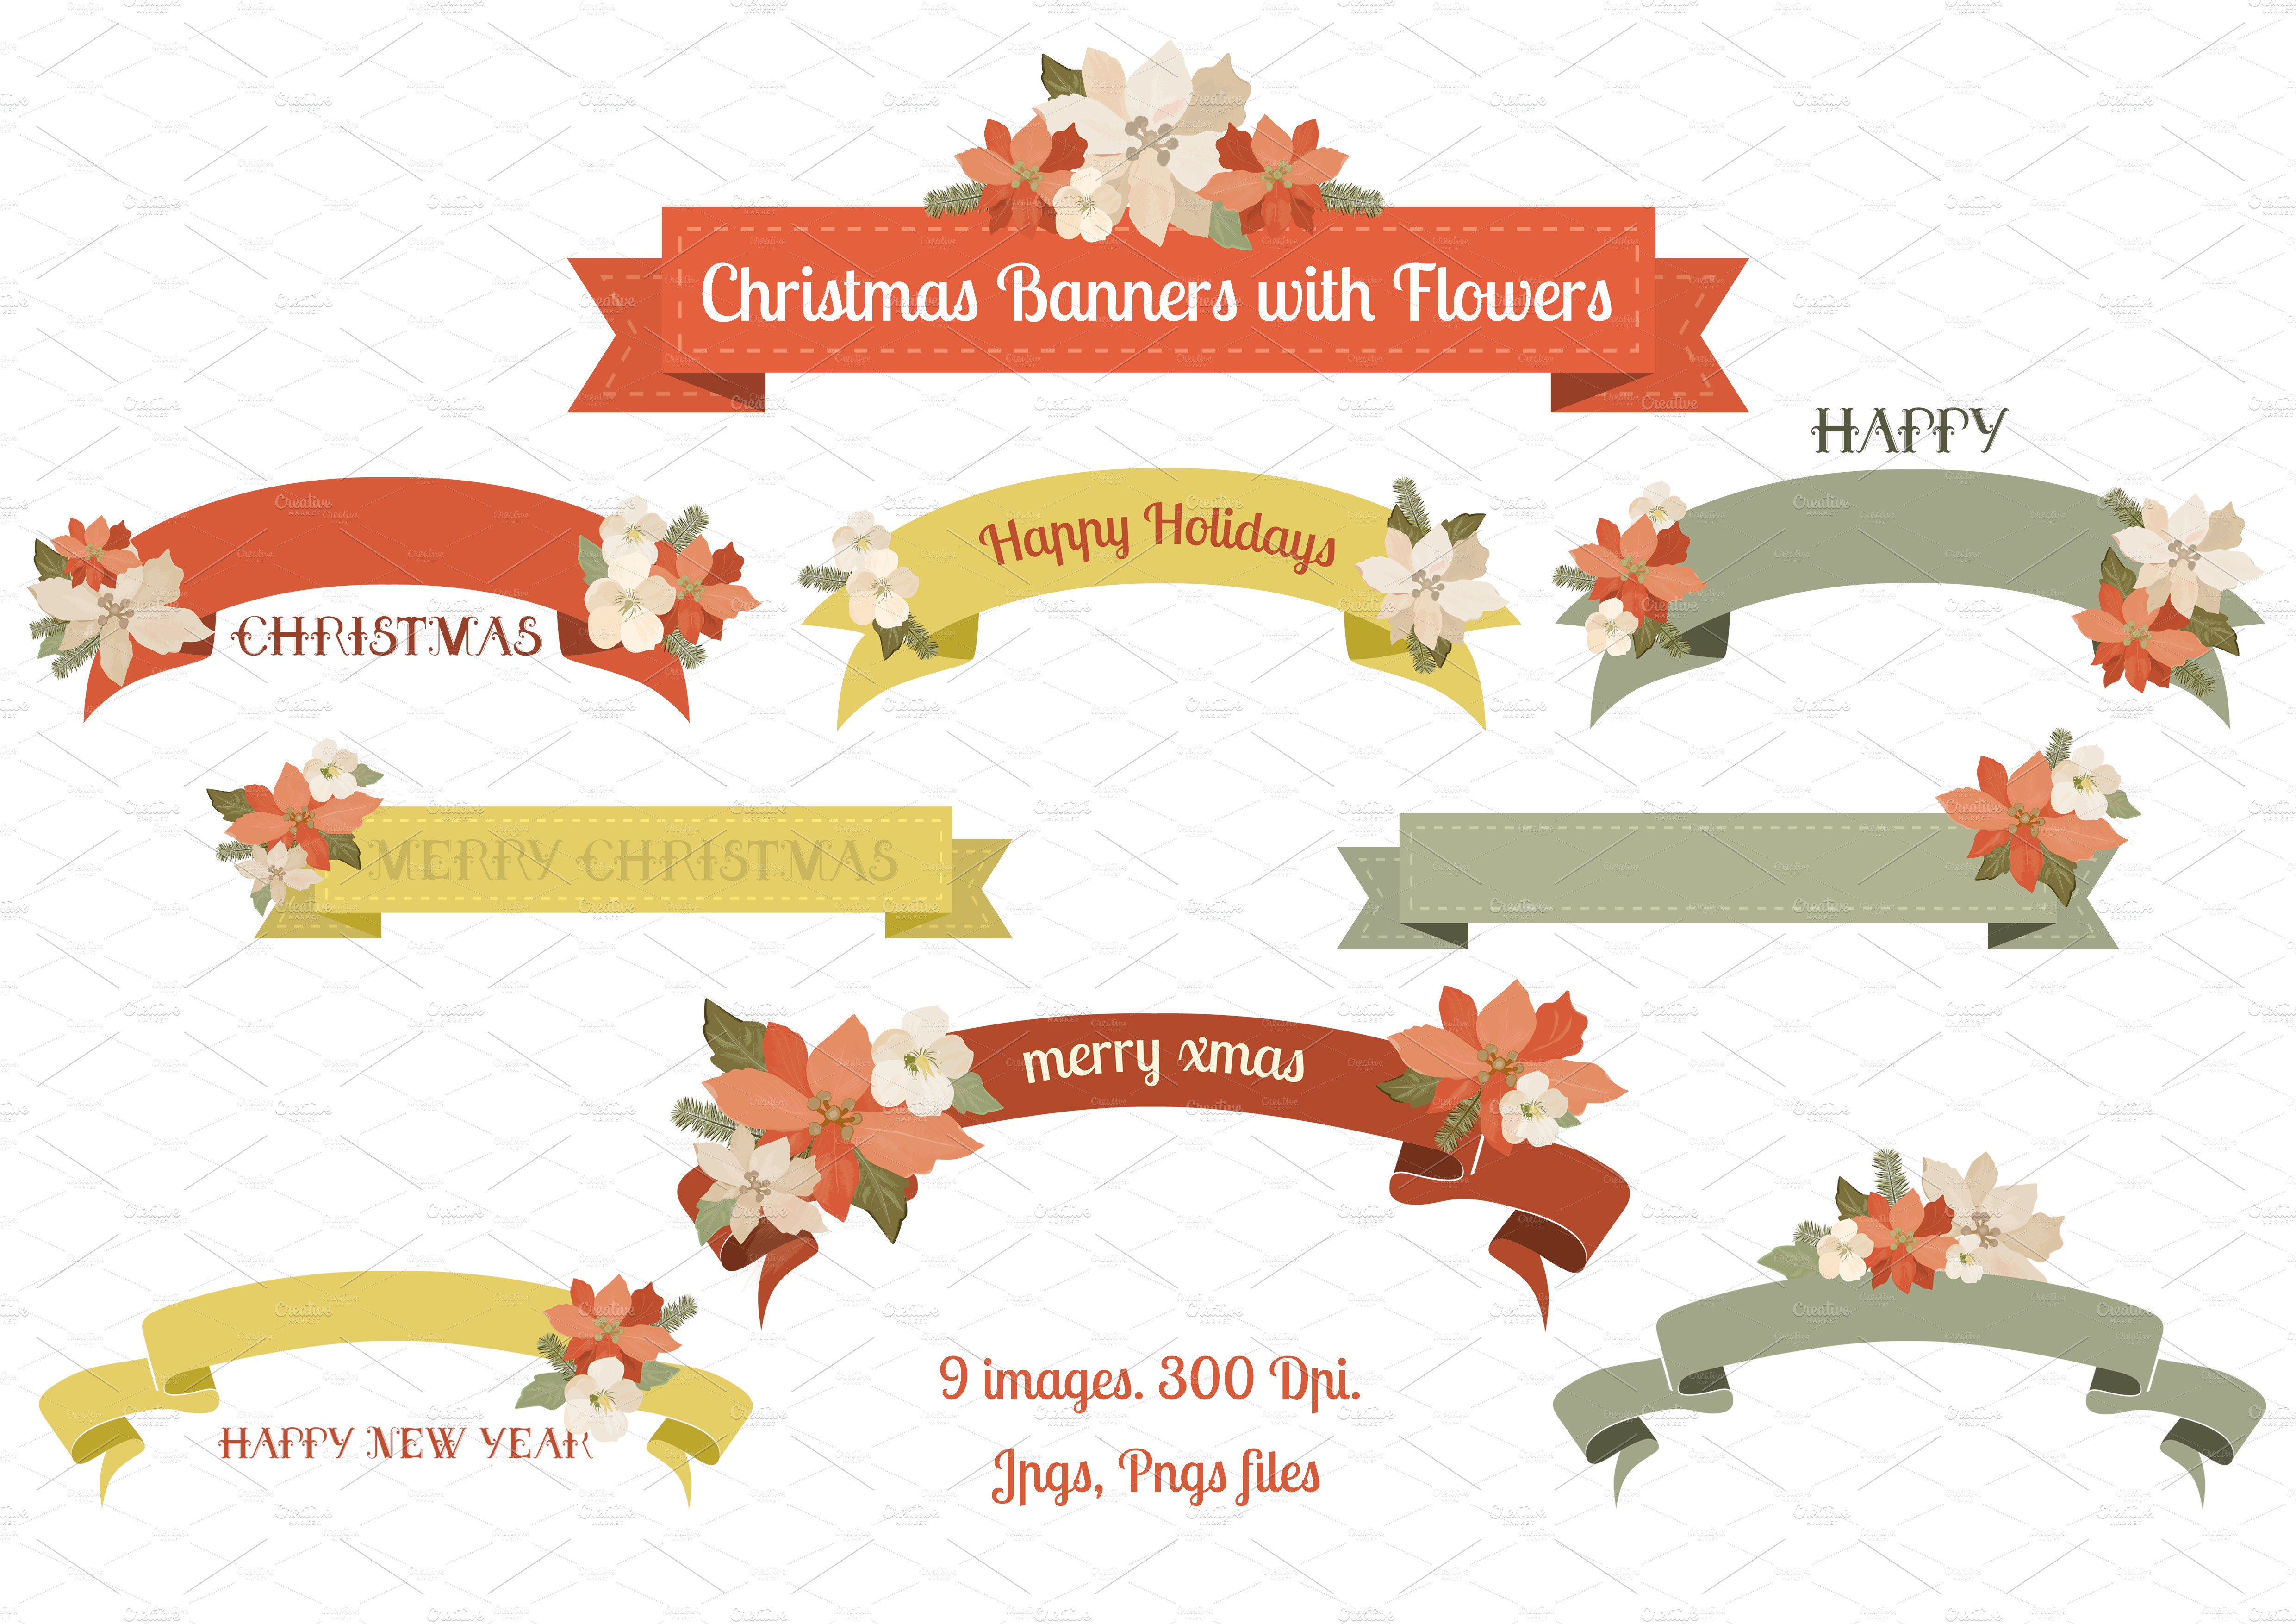 Christmas Banners with Flowers ~ Illustrations ~ Creative ...